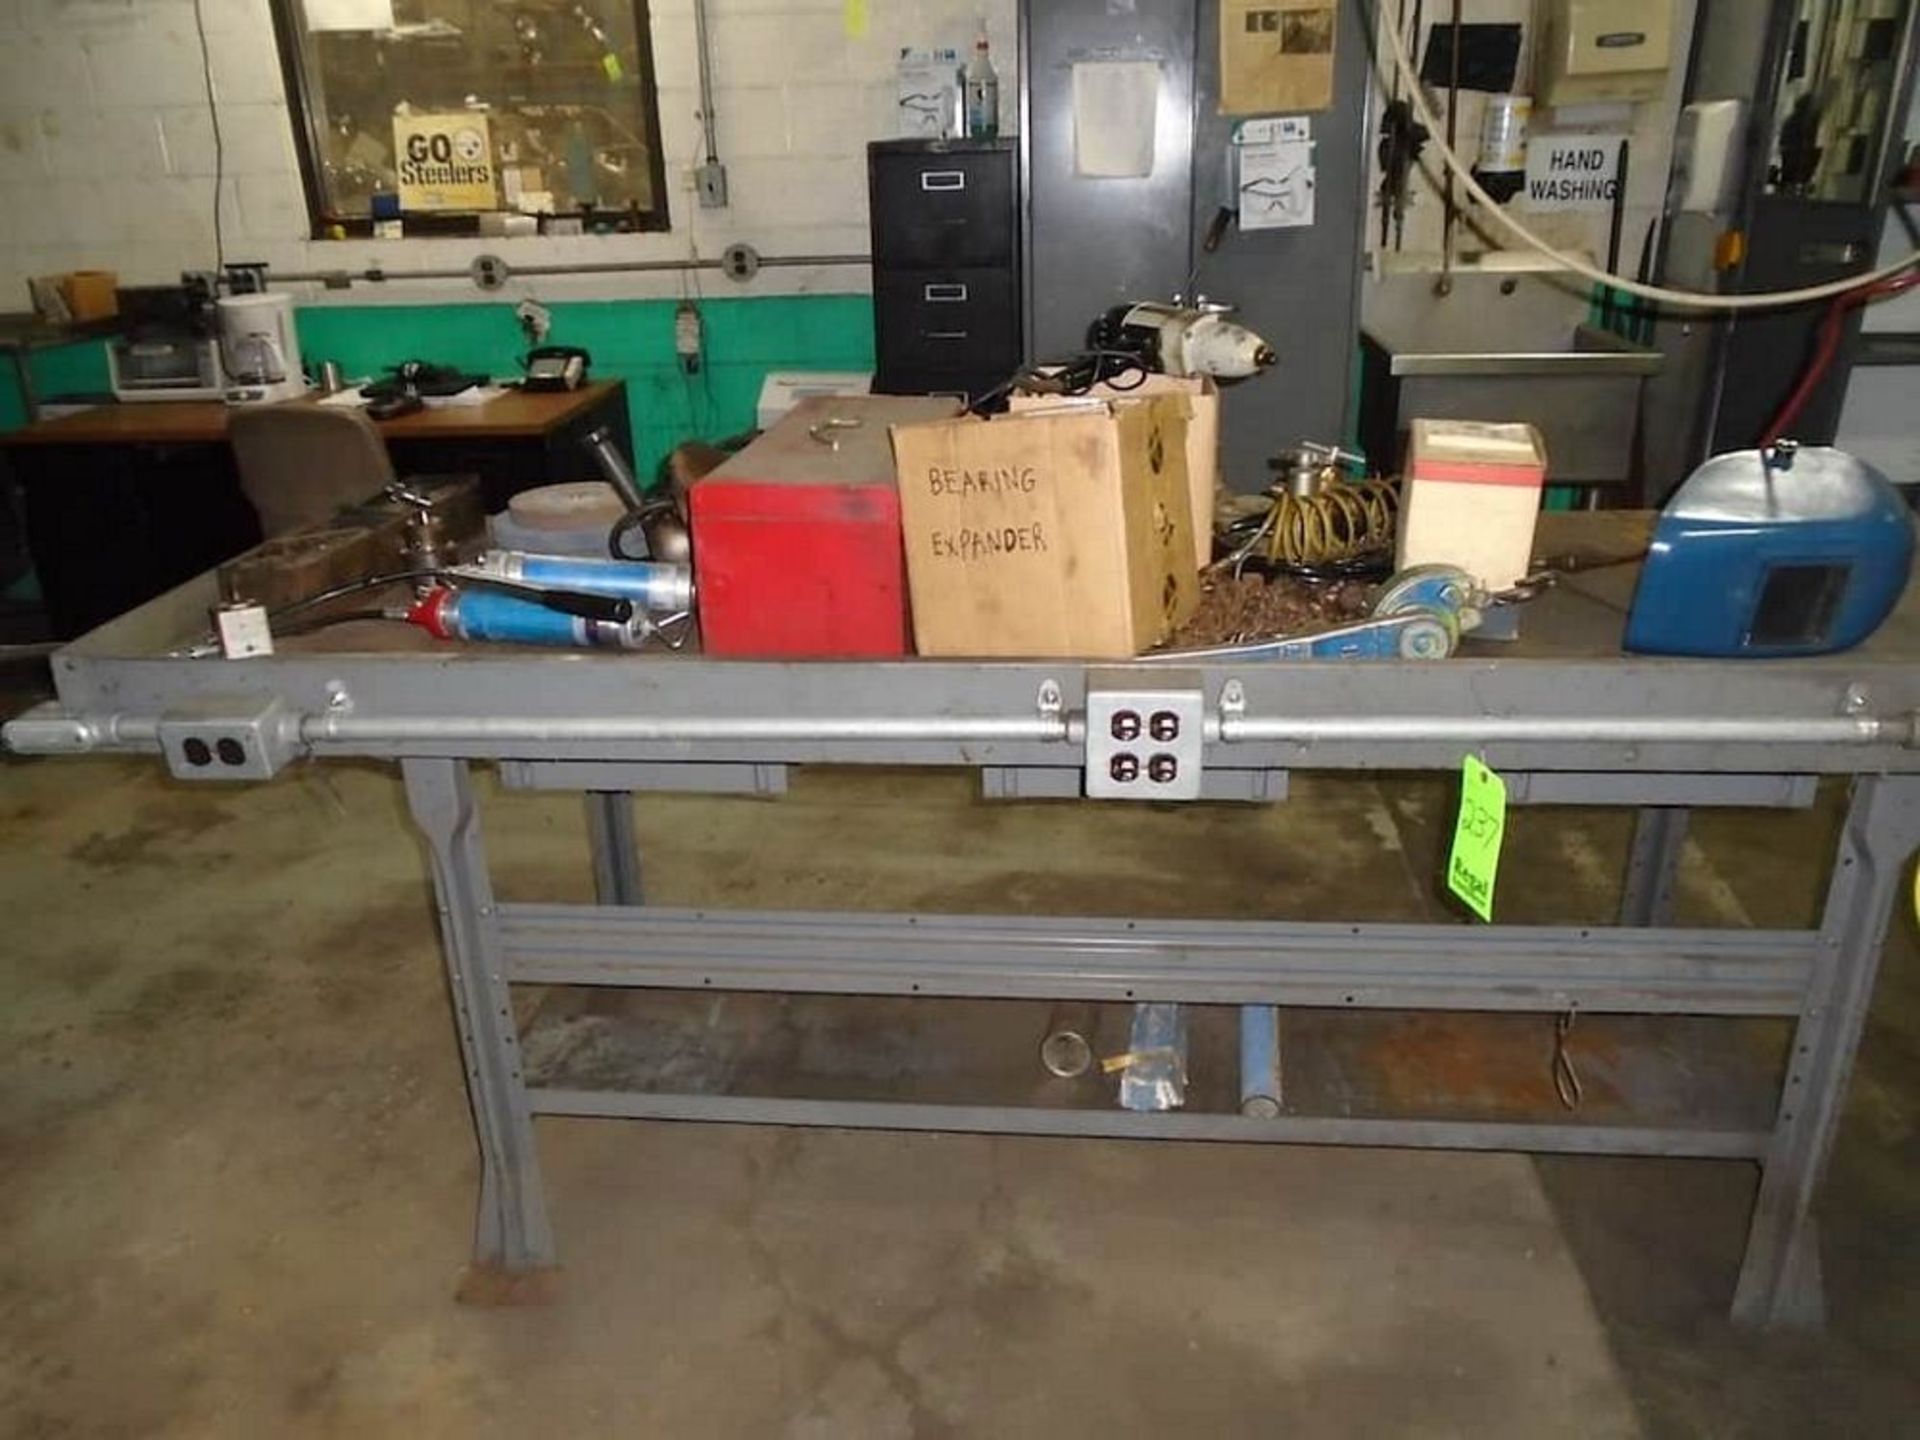 Welding Table and contents ( Tool boxes, Grinder)